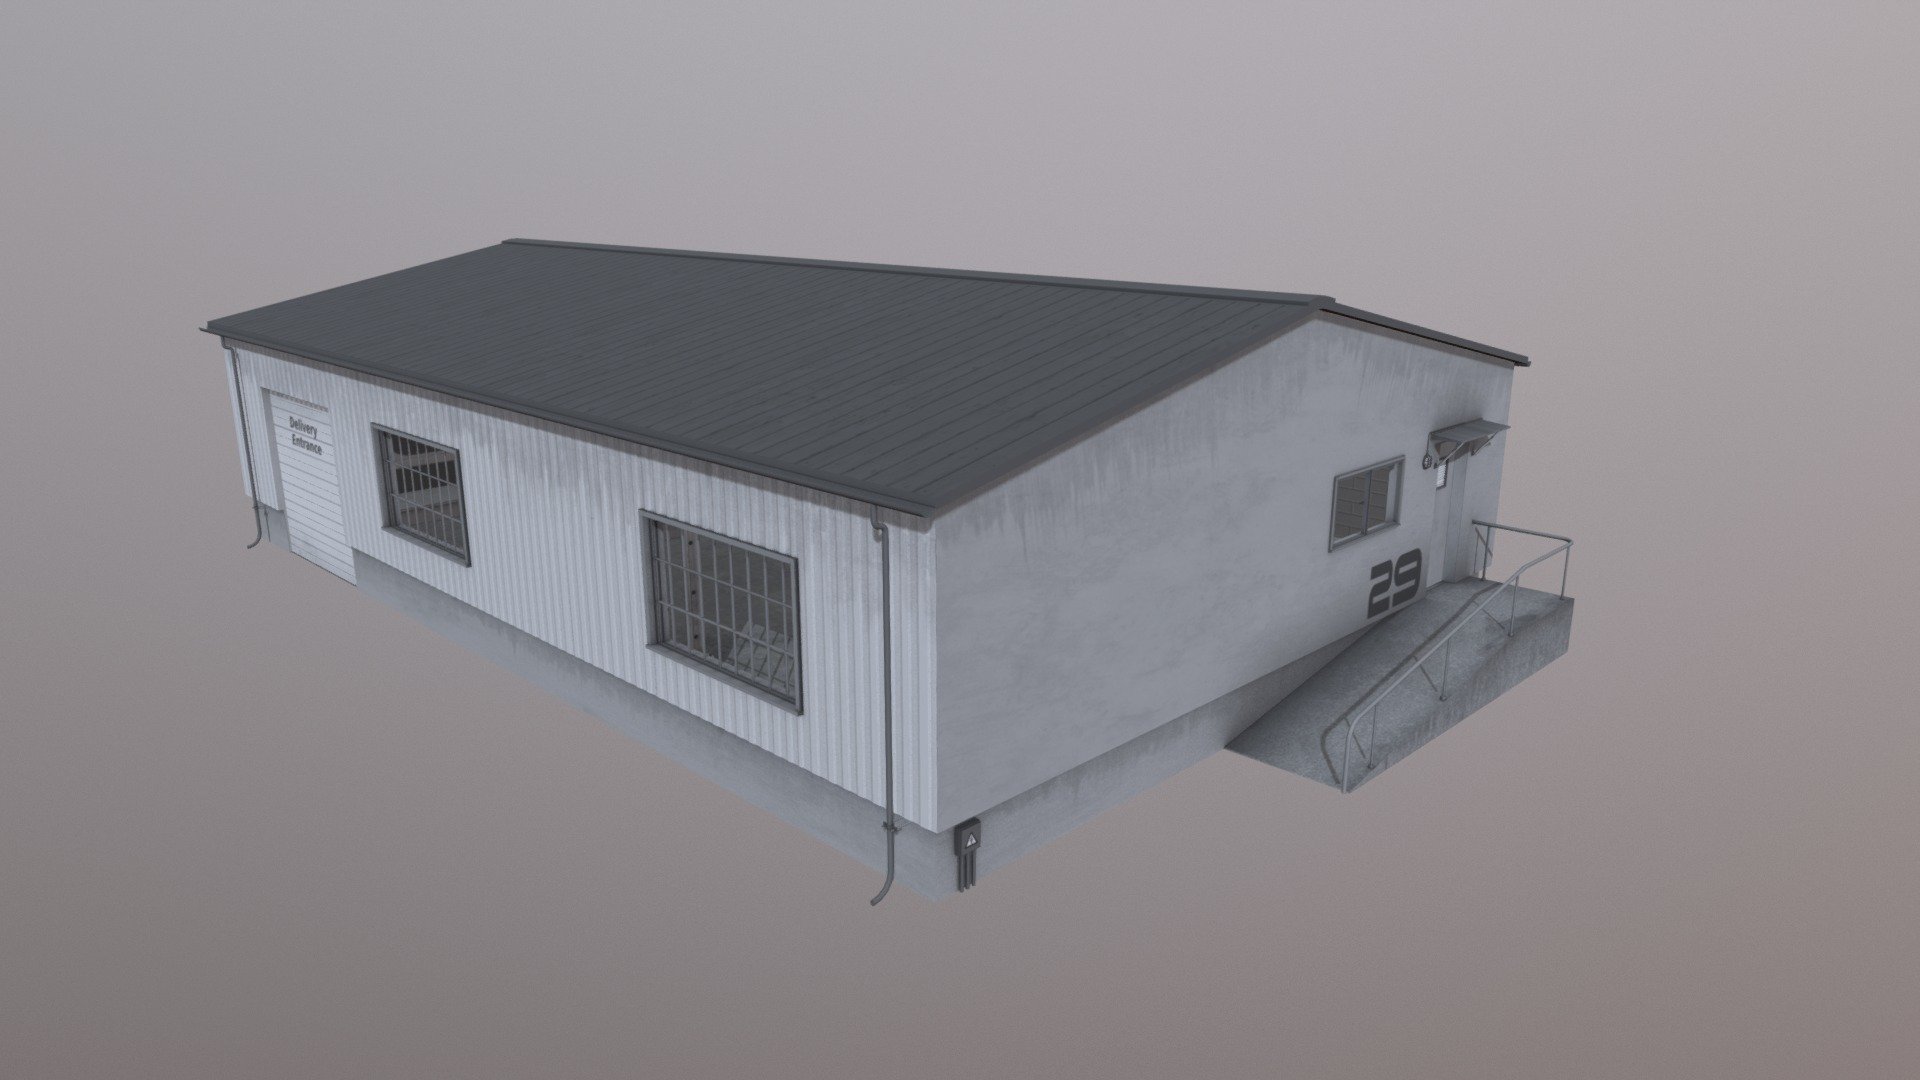 A close up view of the warehouse included in the &ldquo;Warehouse Assets